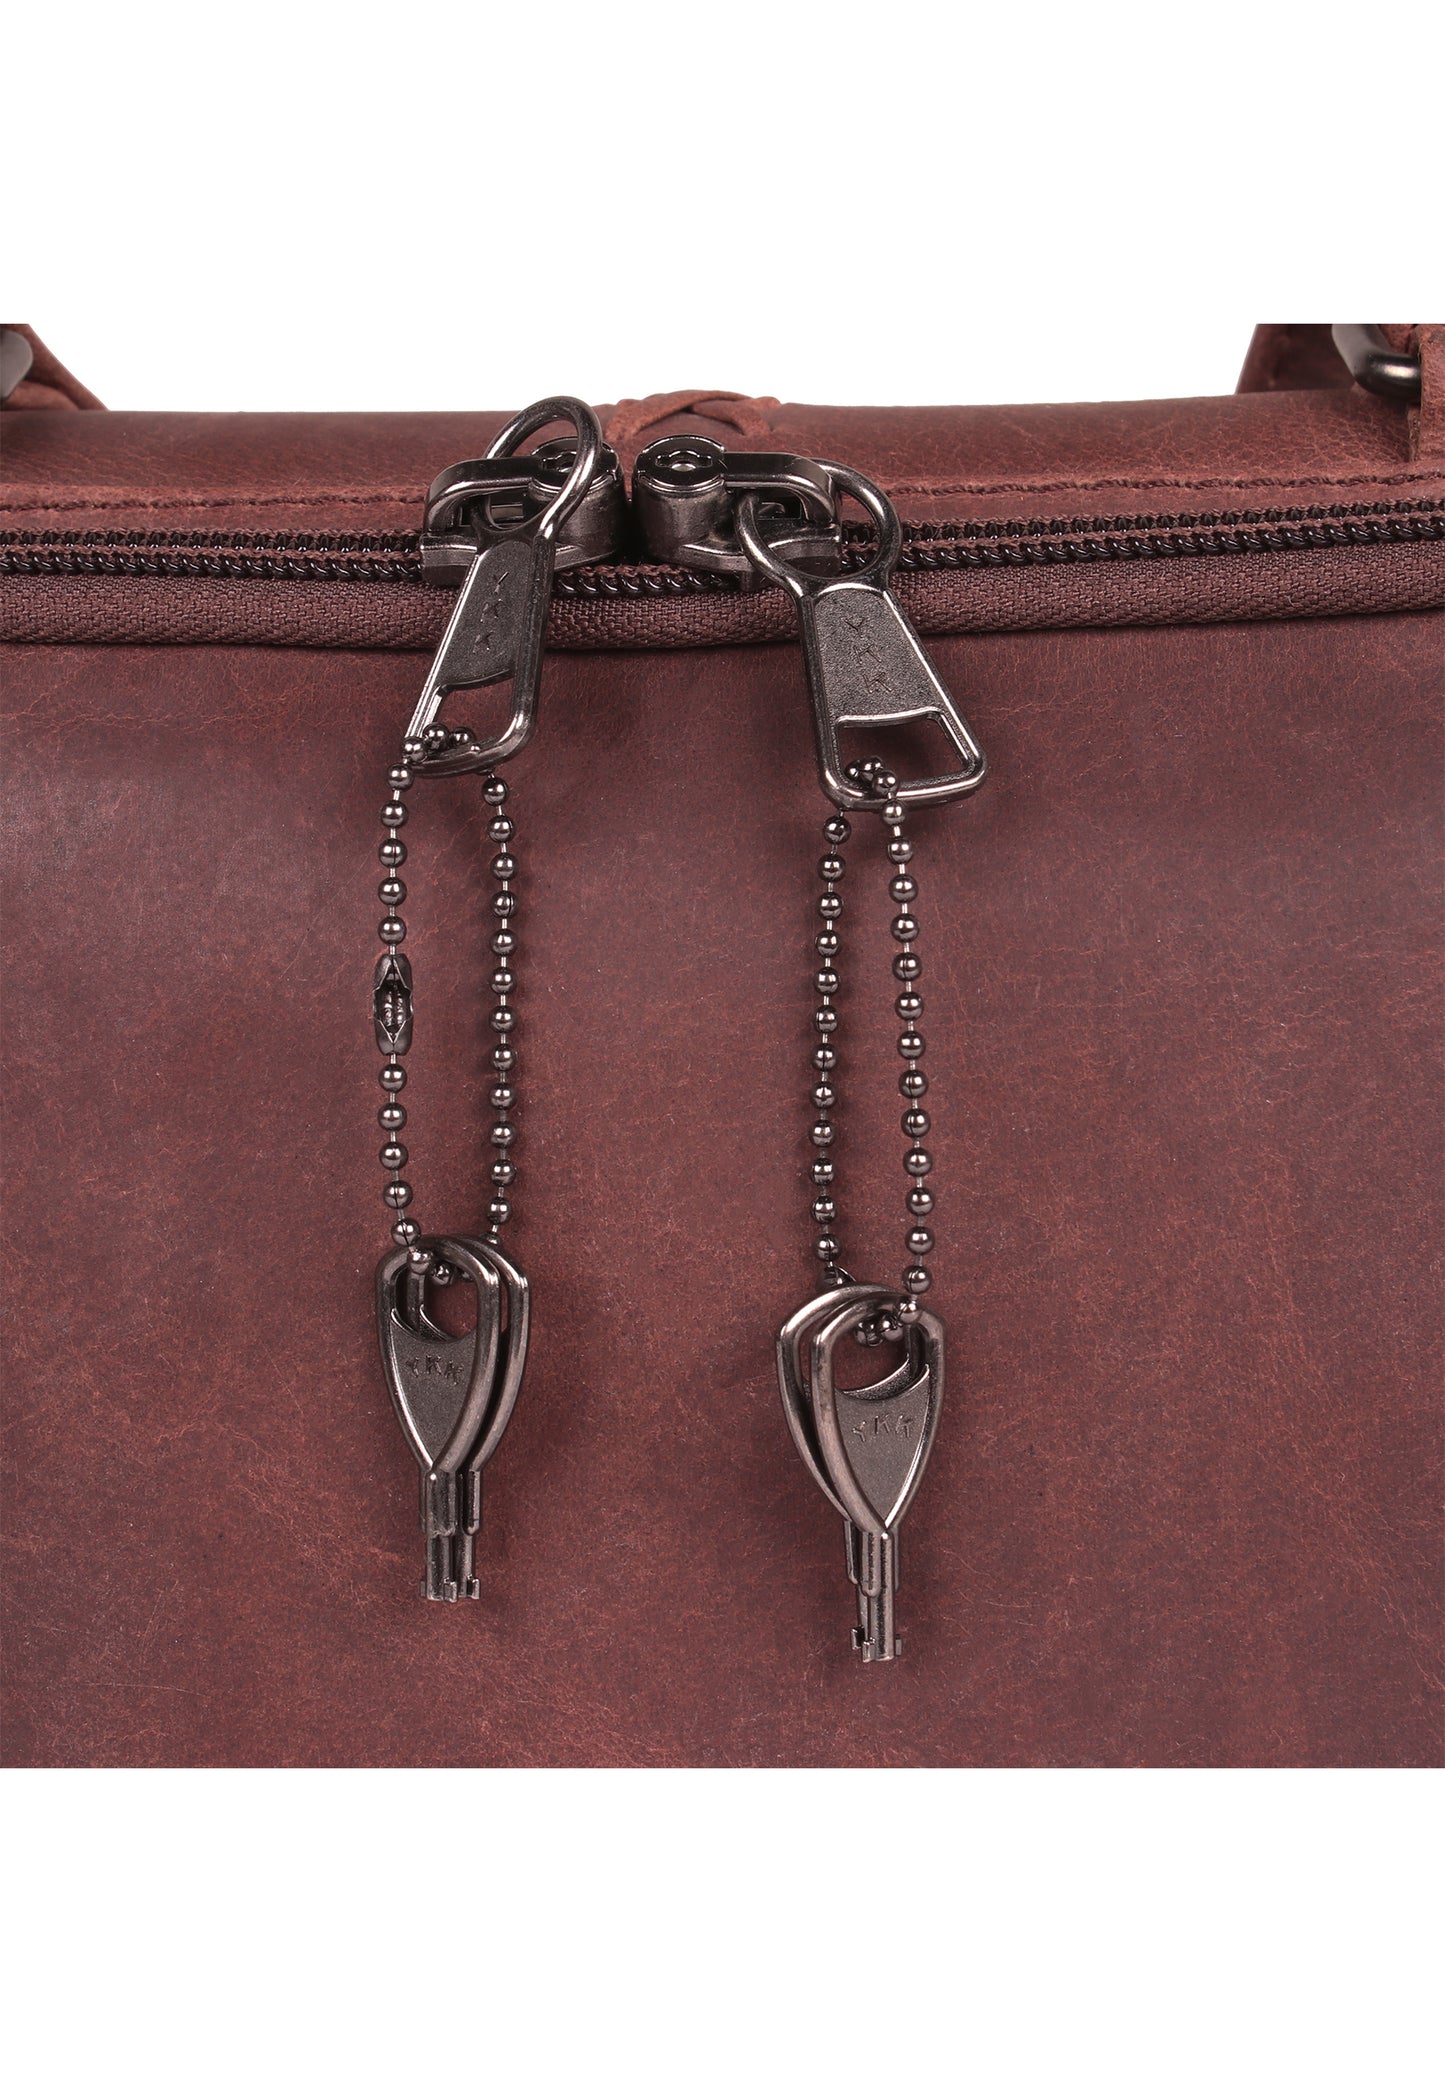 Locking gun compartment on conceal carry purse